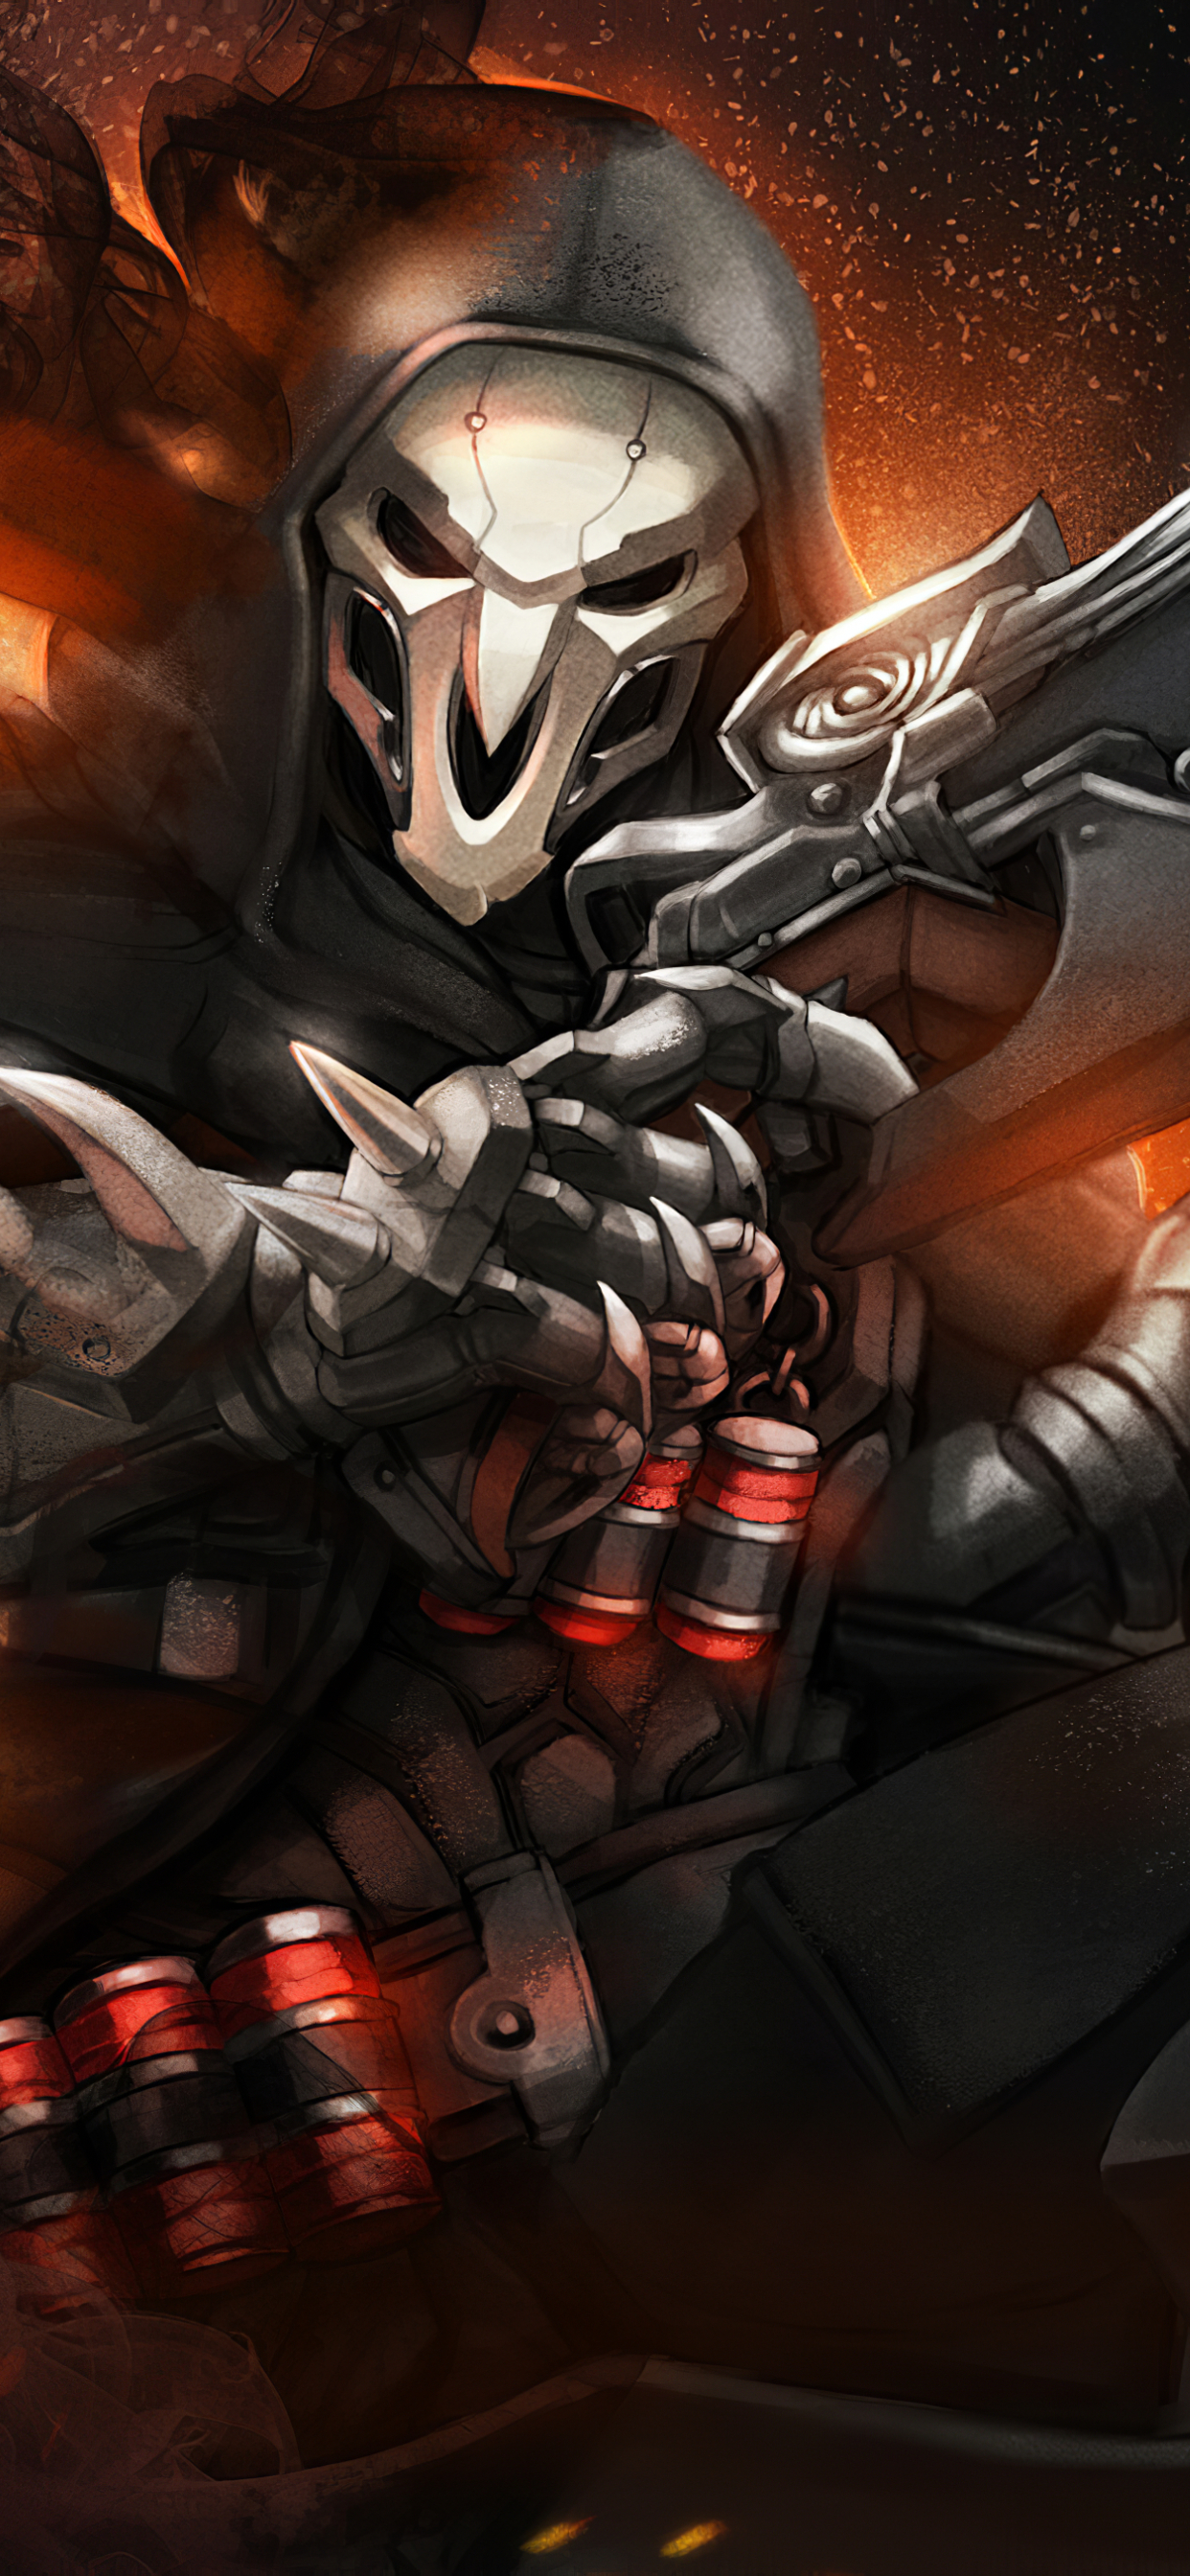 1242x2688 Reaper Overwatch Game Iphone Xs Max Wallpaper Hd Games 4k Wallpapers Images Photos And Background